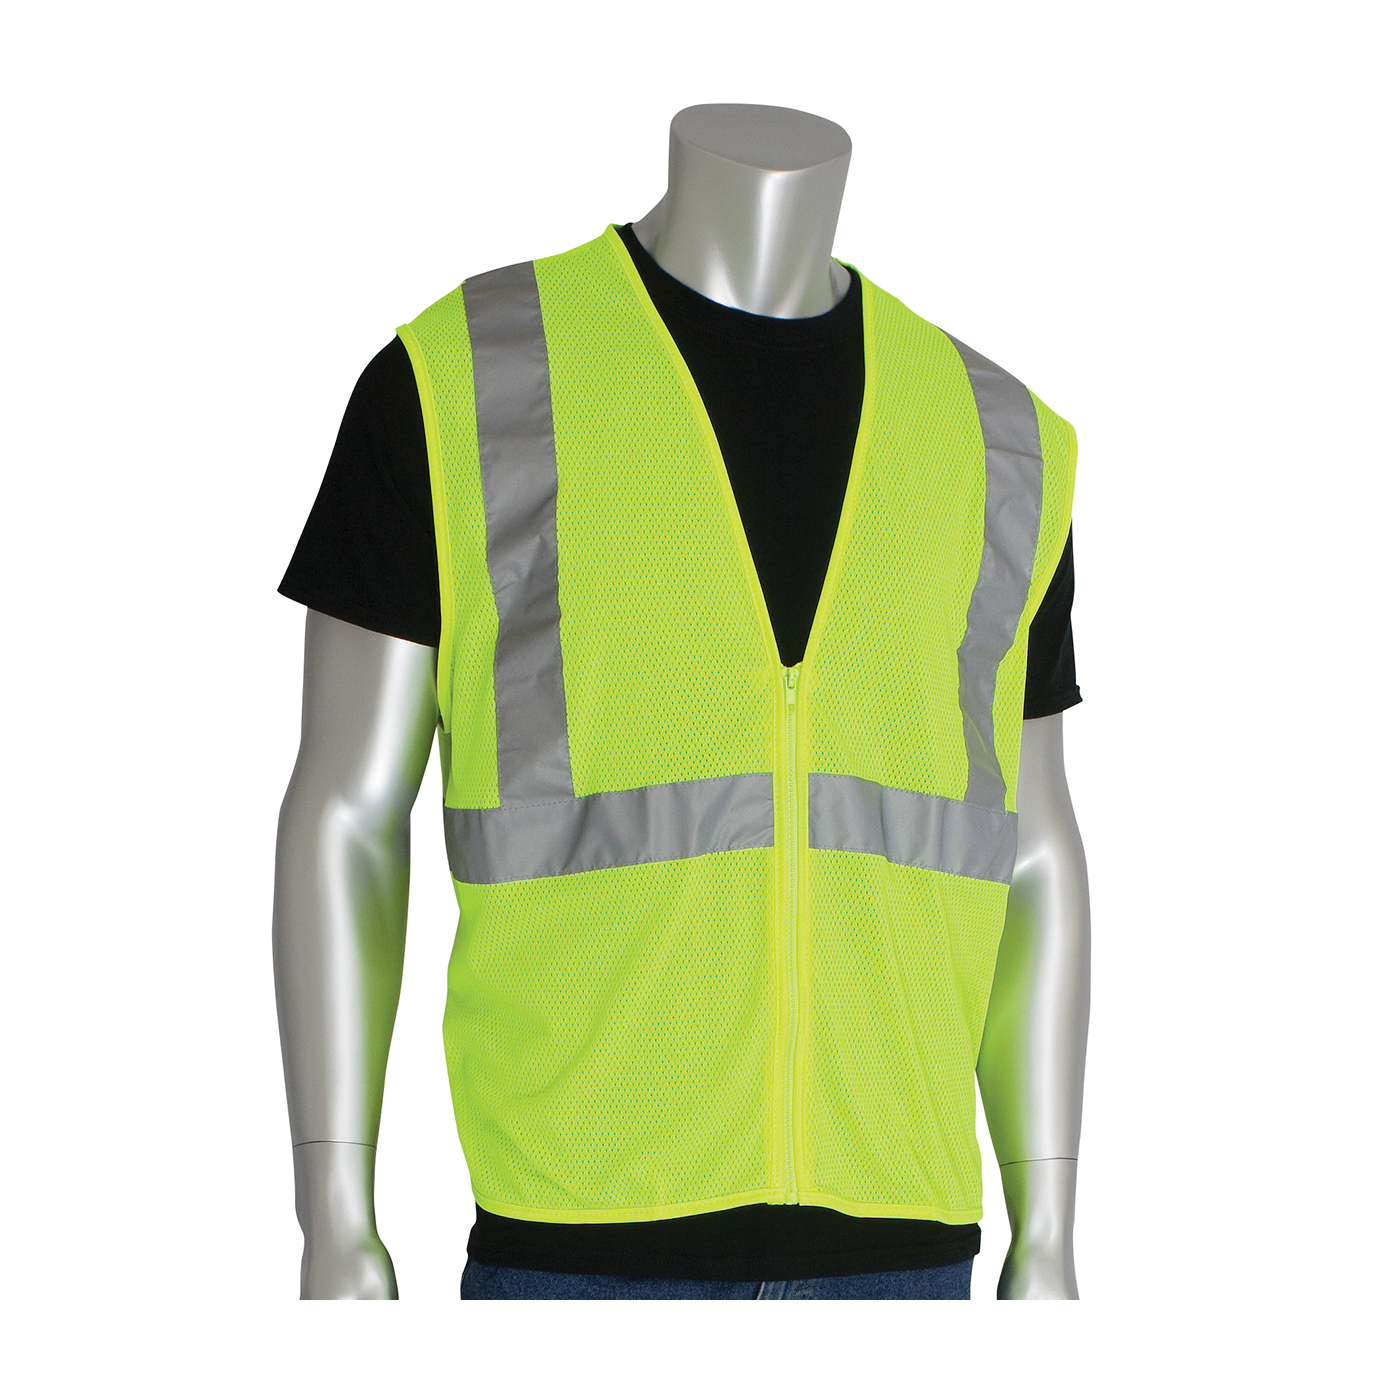 PIP® 302-MVGZLY-S Safety Vest, S, Hi-Viz Lime Yellow, Polyester Mesh, Zipper Closure, ANSI Class: Class 2, Specifications Met: ANSI 107 Type R